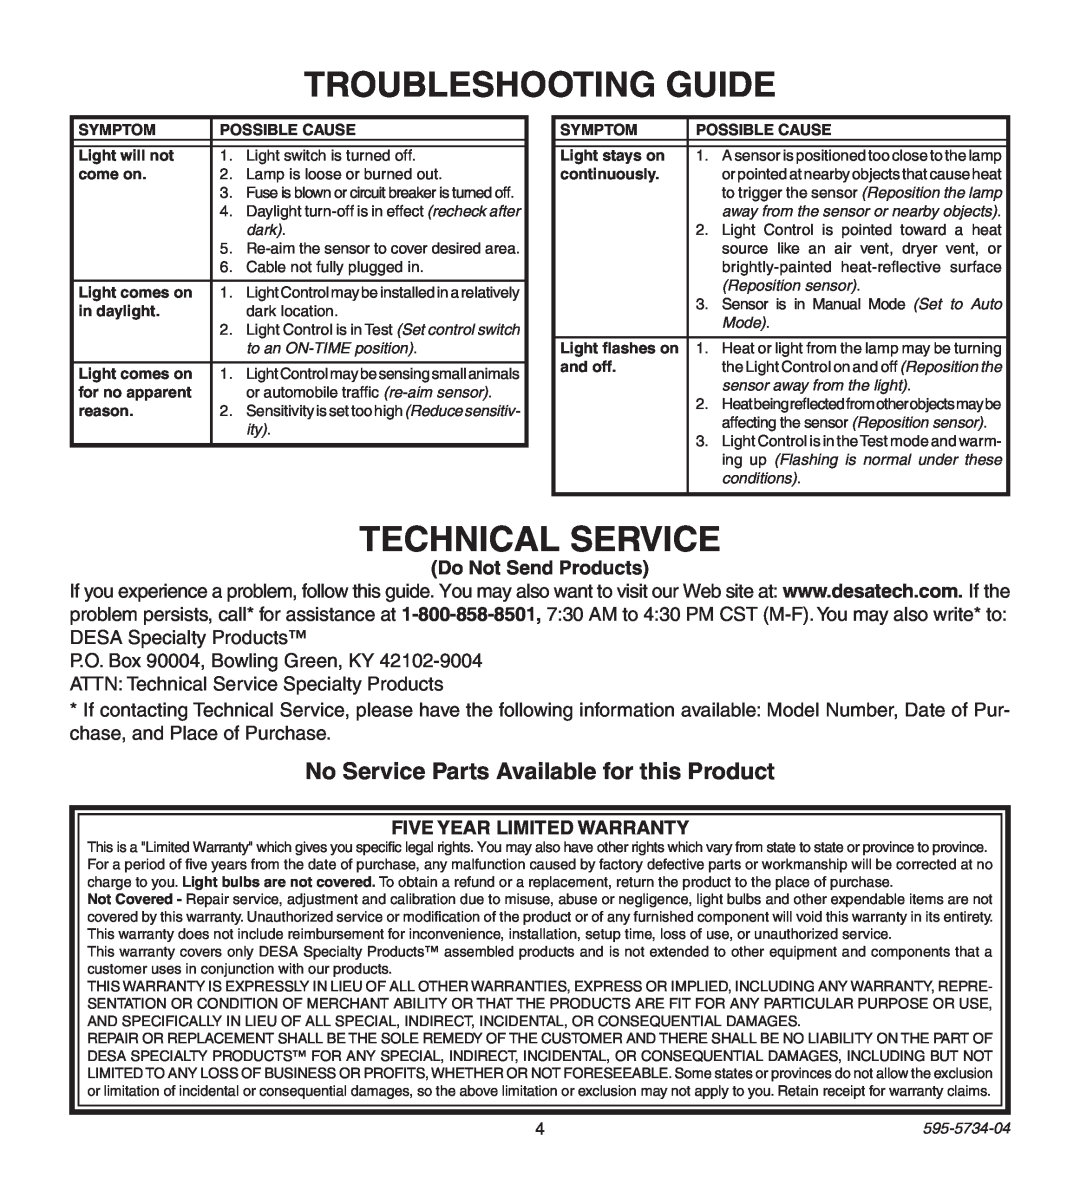 Heath Zenith 5213, 5212 manual Troubleshooting Guide, Technical Service, No Service Parts Available for this Product 